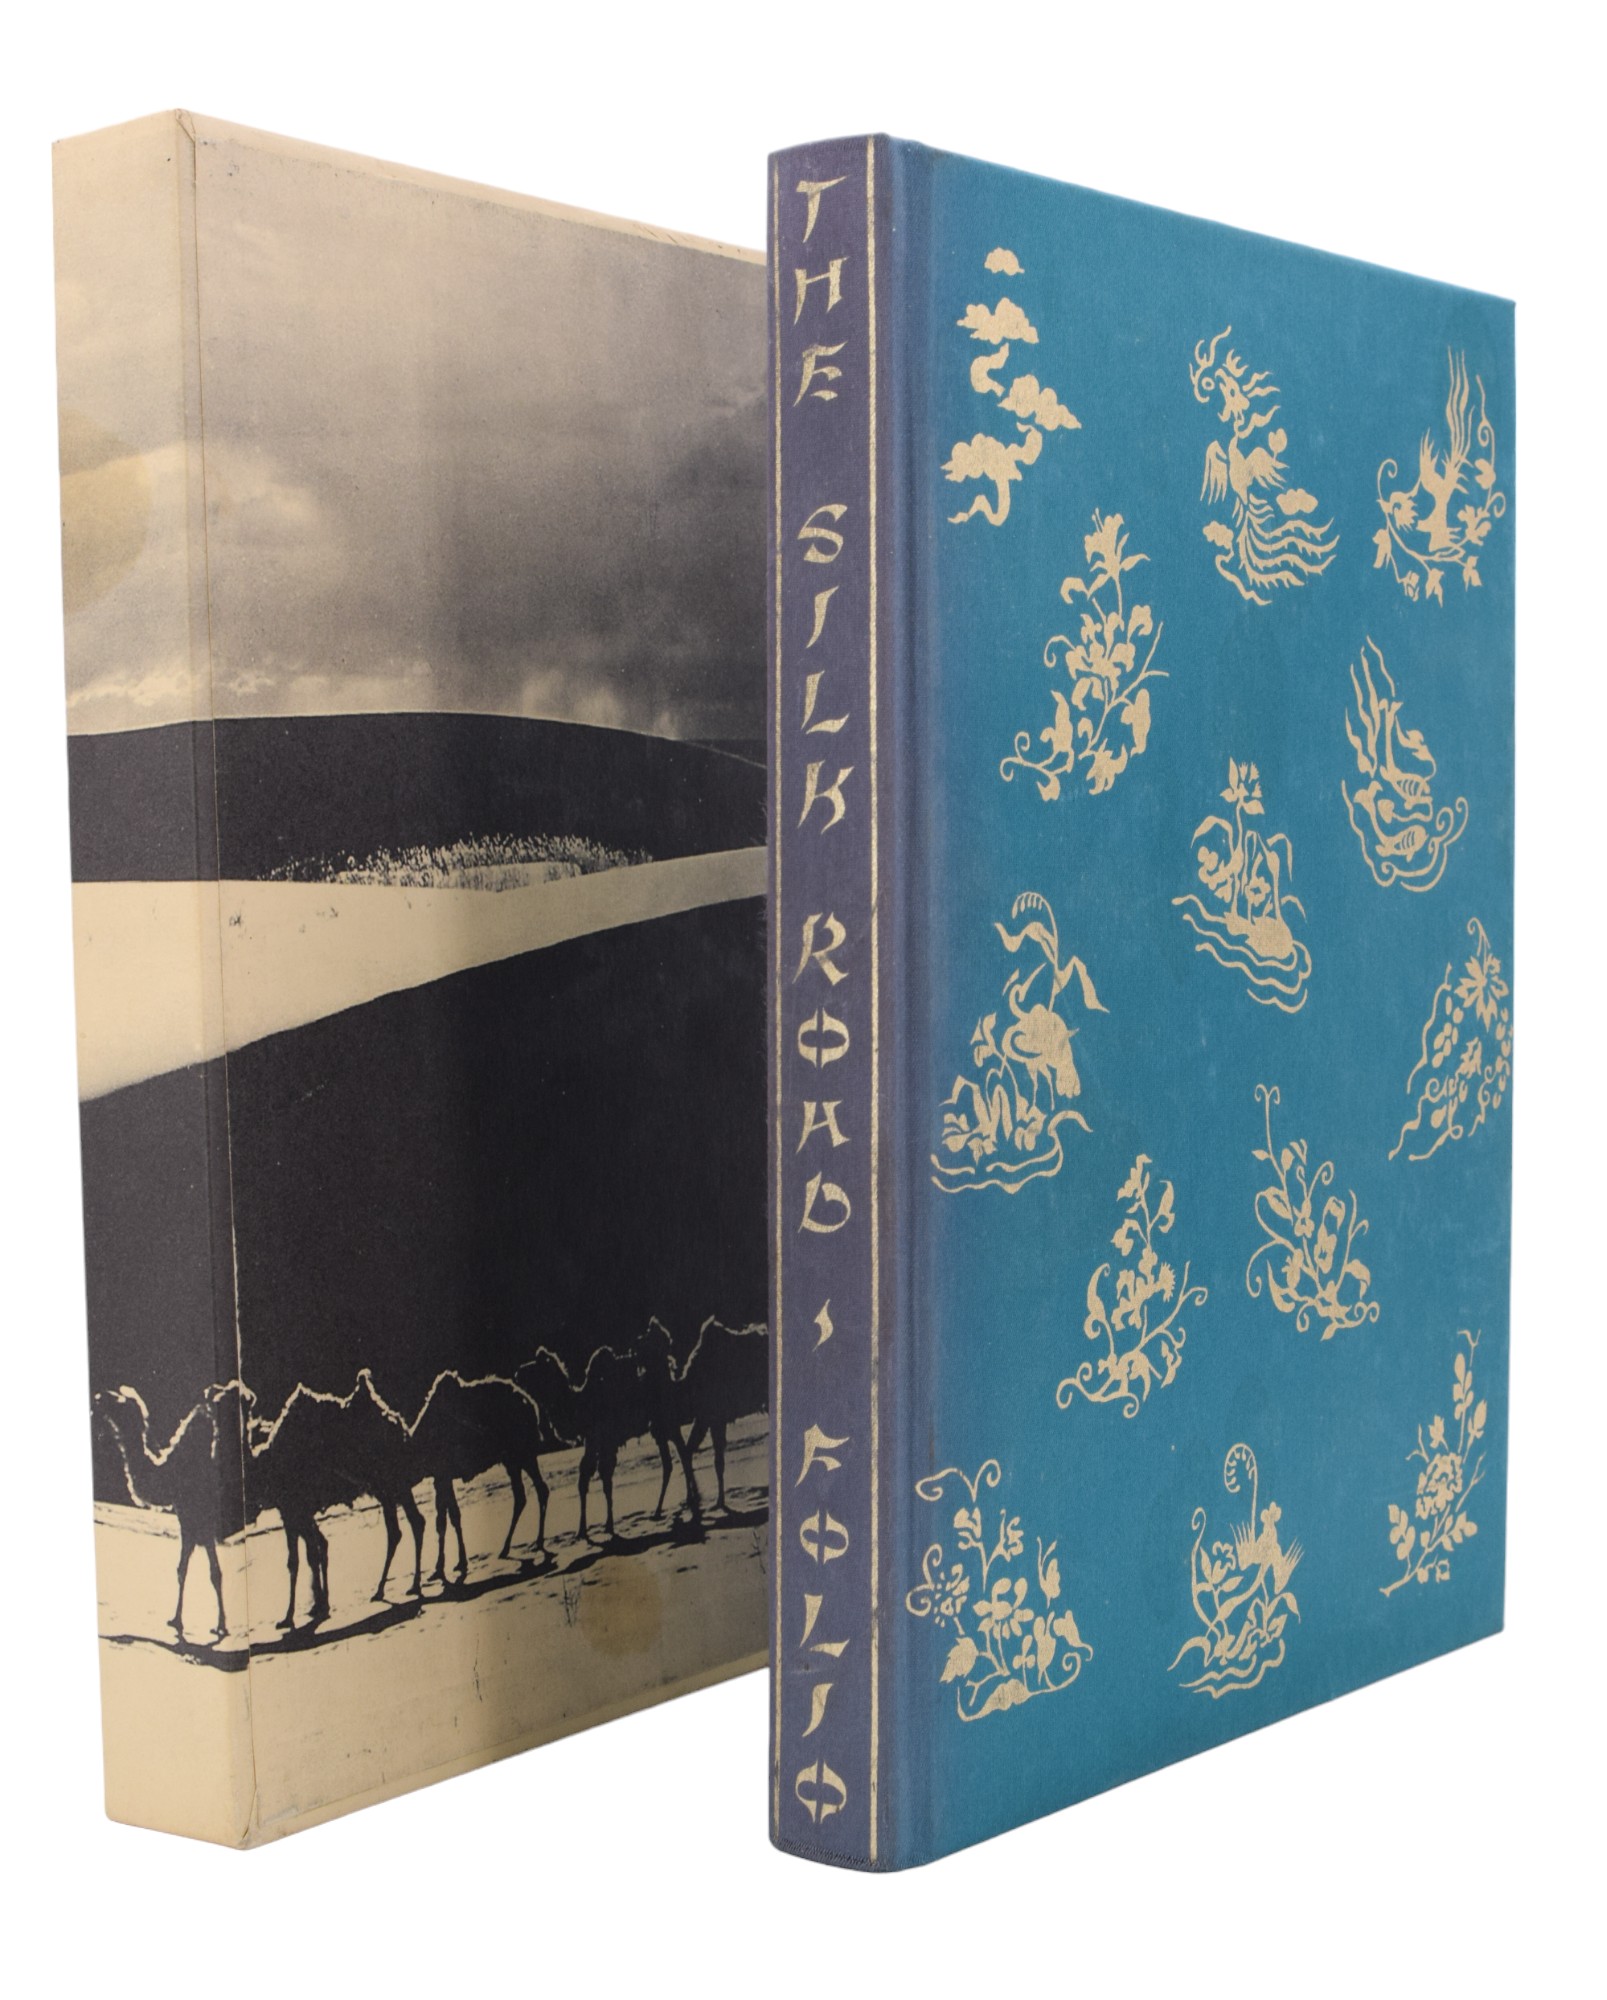 Seven Folio Society publications in slip cases, including Frances Wood, "The Silk Road", 2002; - Image 30 of 31